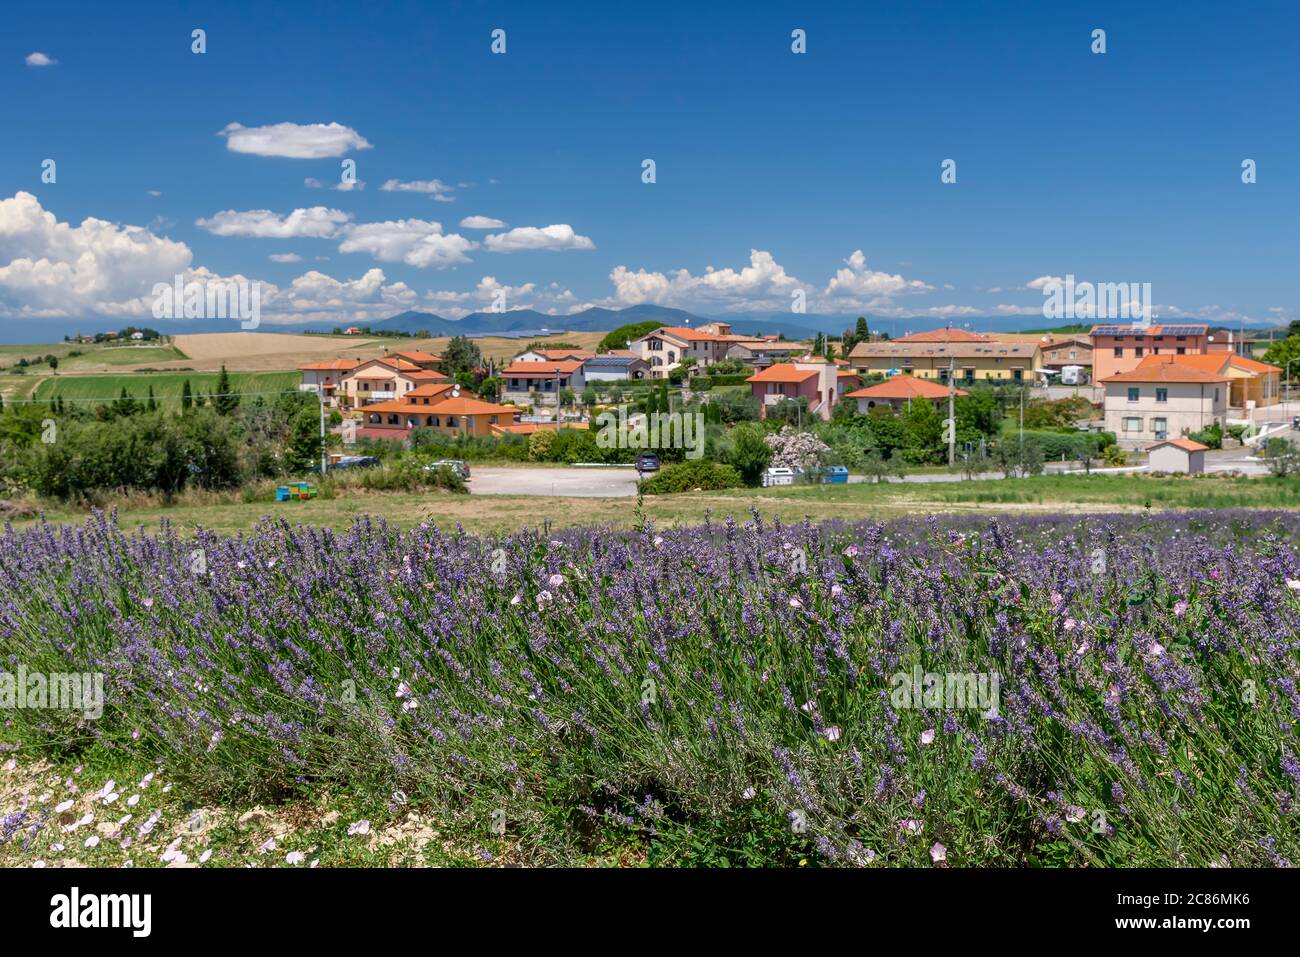 View of the Tuscan village of Santa Luce, Pisa, Italy, from the lavender fields that surround it Stock Photo